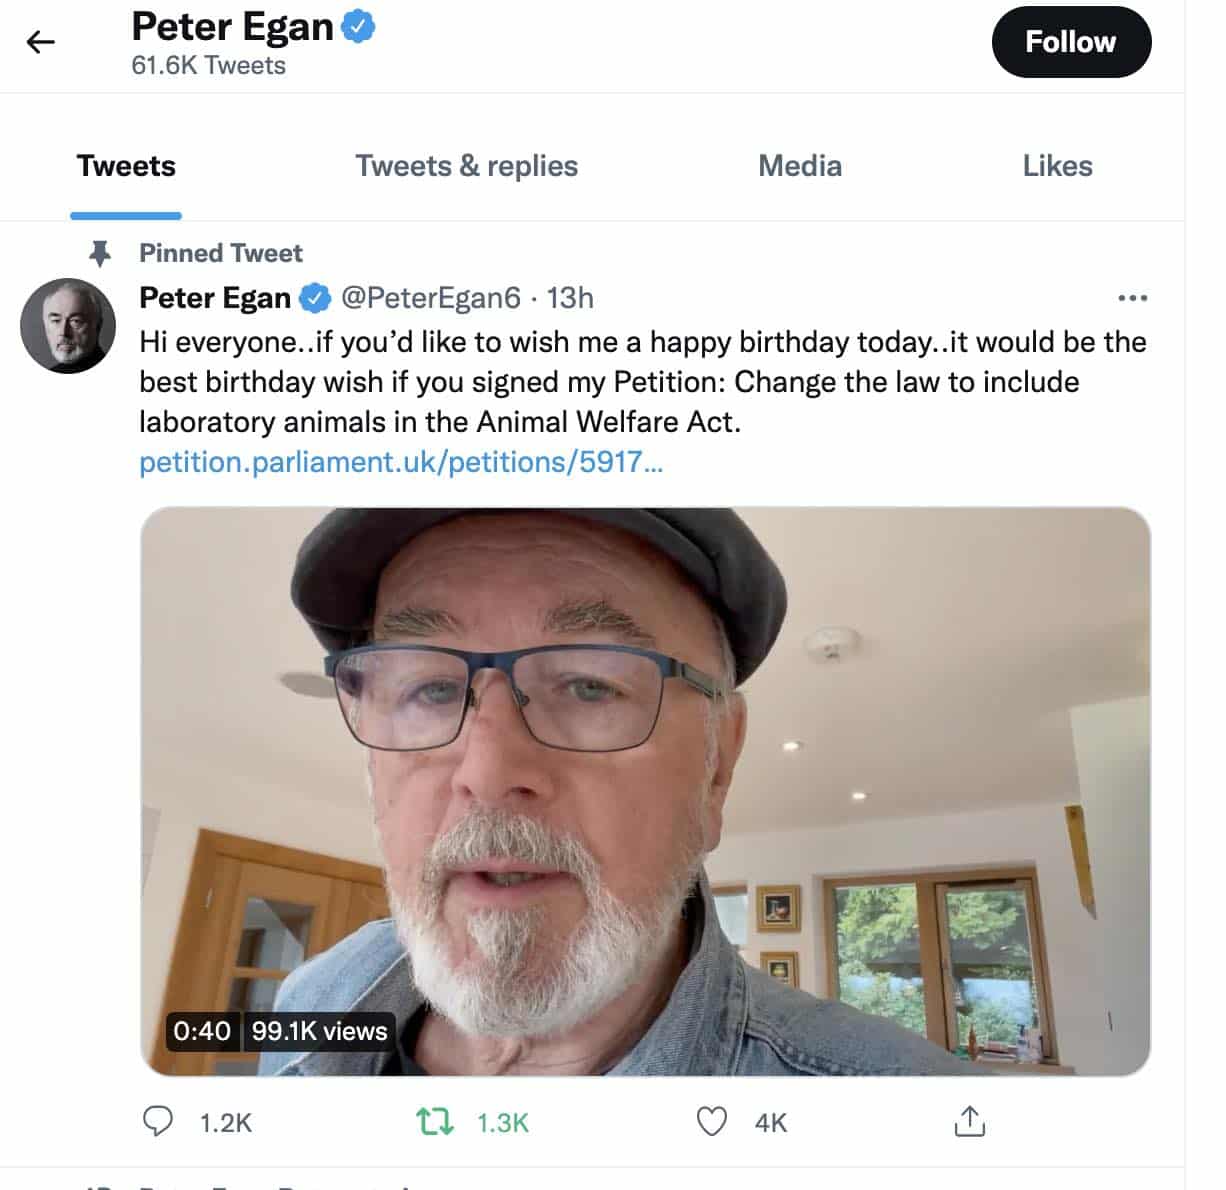 Famed actor Peter Egan asks British fans to sign anti-vivisection petition.